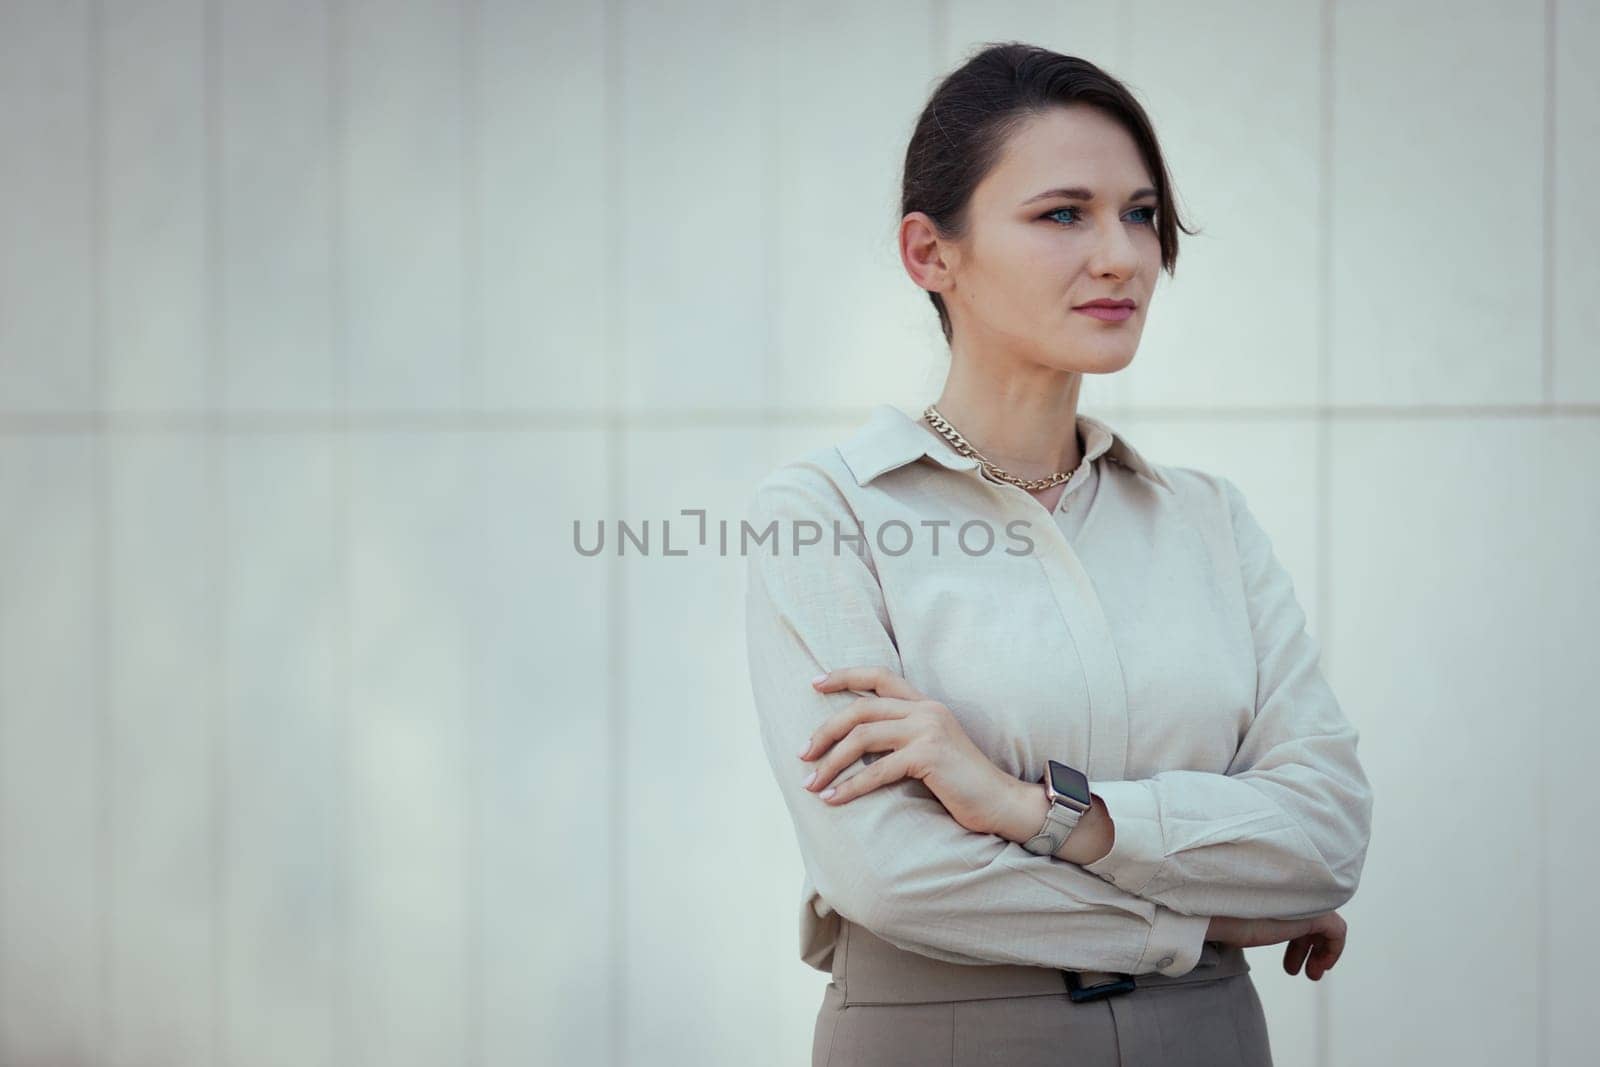 Caucasian woman in office or business style in clothes. Restrained female image in beige tones with a smart watch, copy space